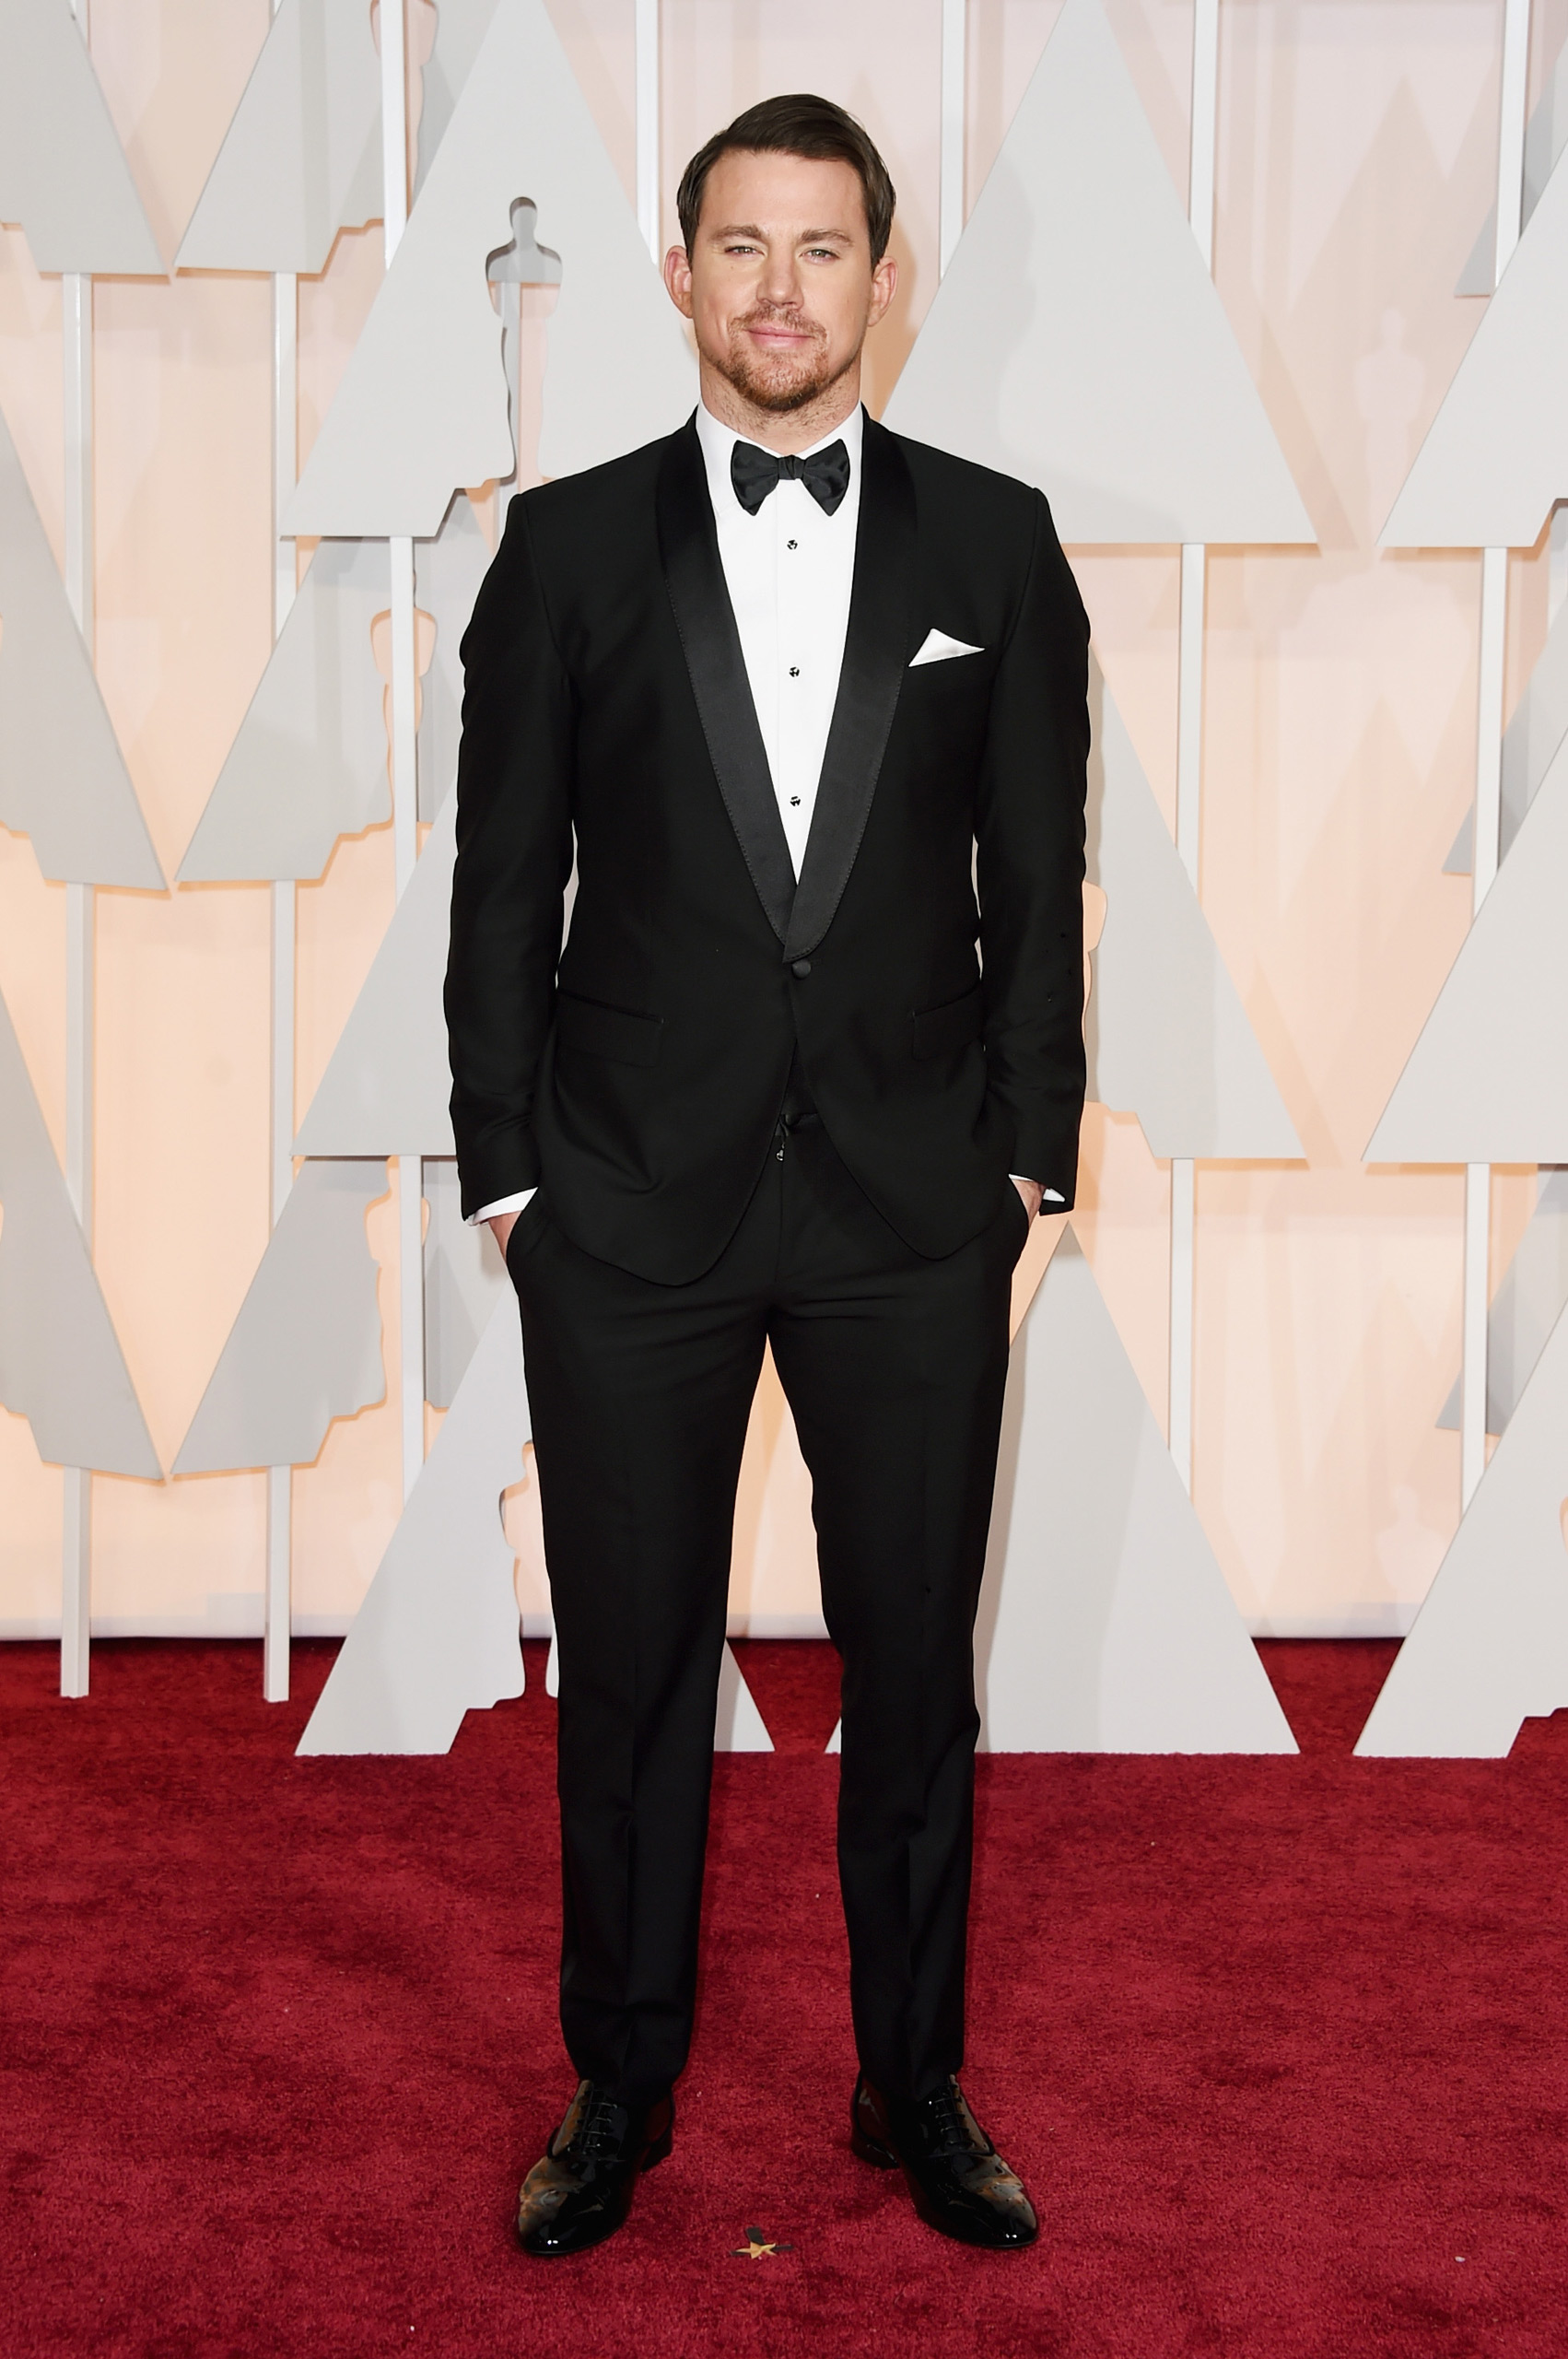 Channing Tatum attends the 87th Annual Academy Awards on Feb. 22, 2015 in Hollywood, Calif. (Jason Merritt—Getty Images)